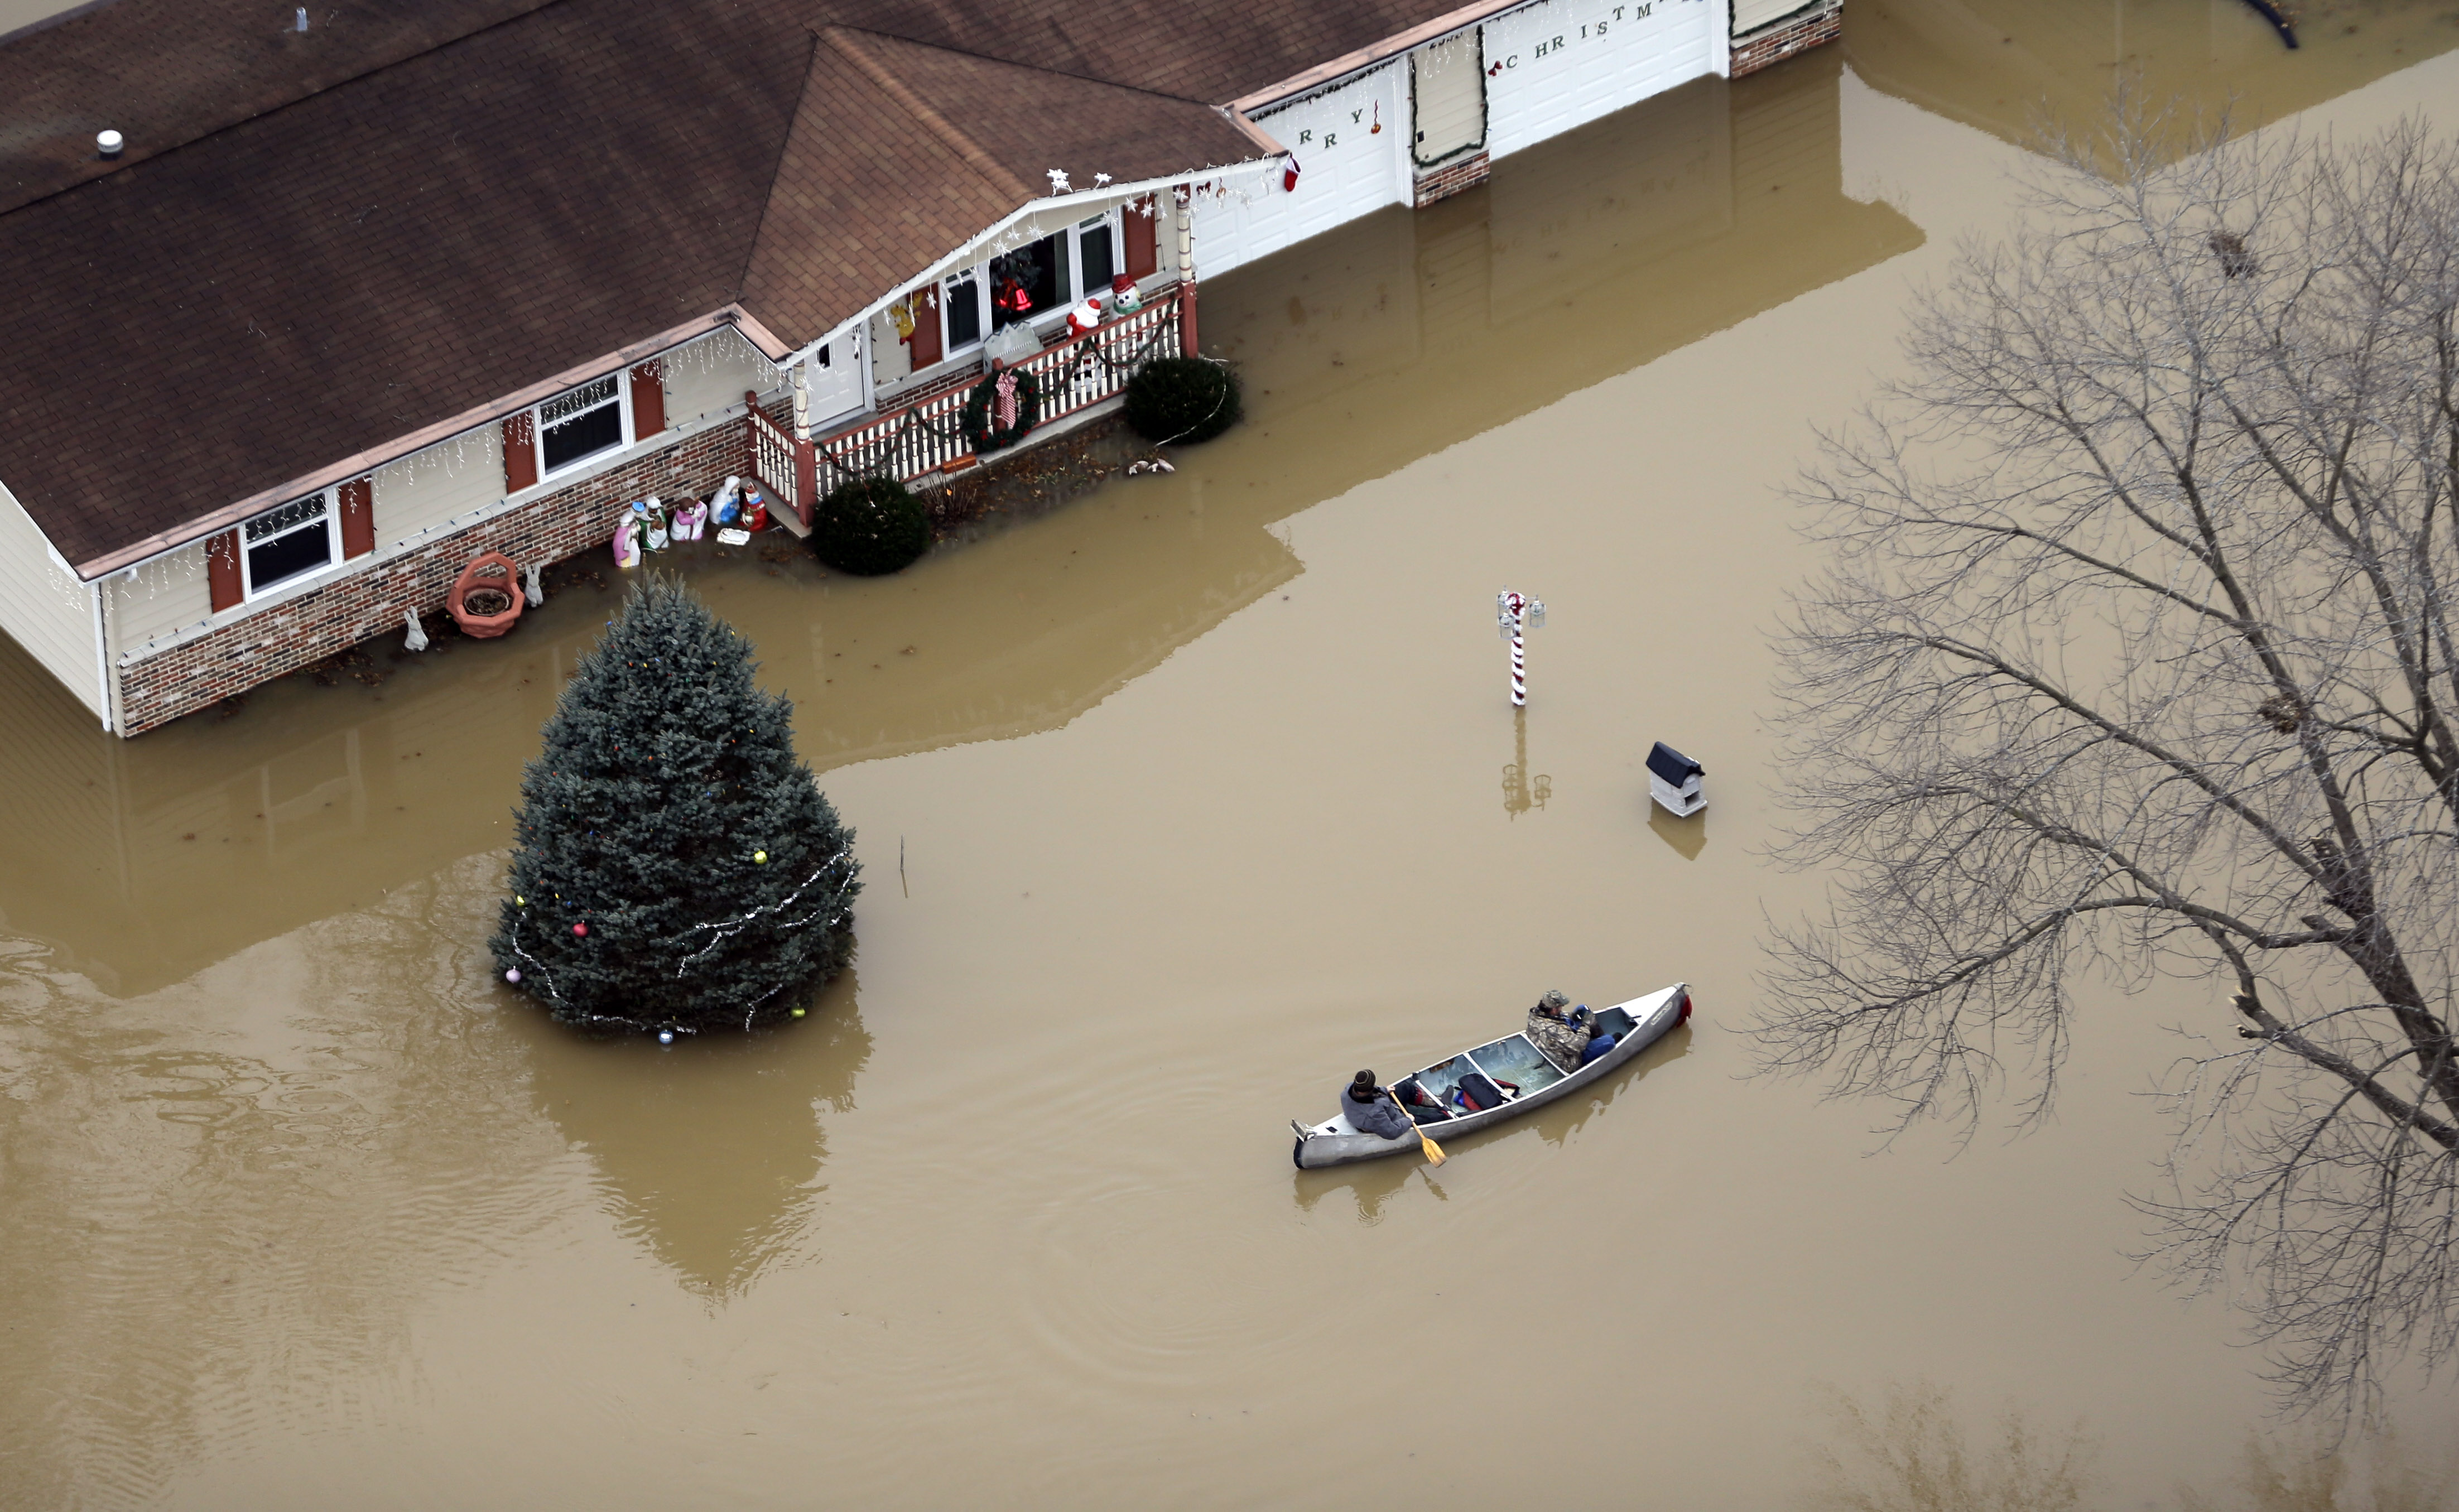 On December 31, 2015, holiday decorations seem out of place on a flooded street in Arnold, MO.